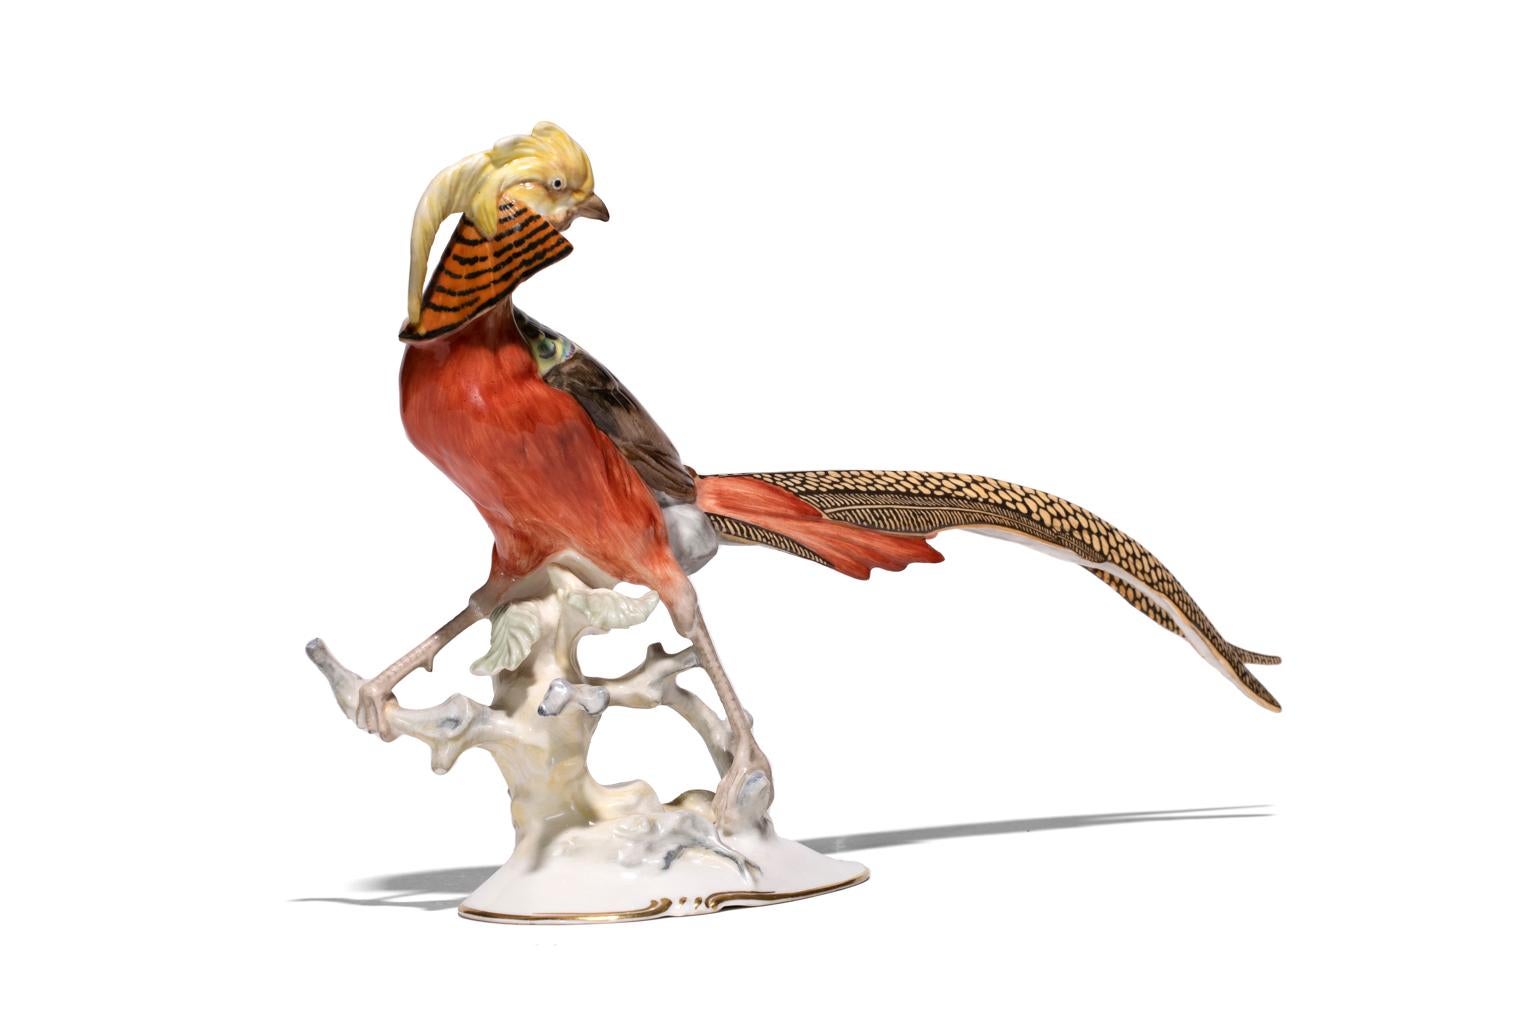 Chinese Pheasant beautifully render with rich oranges, reds, and yellows is a creation of the Hutschenreuther-Selb porcelain manufacturer. The authentic Hutschenreuther-Selb stamp is on the verso. It has a beautifully rendered undulating line from